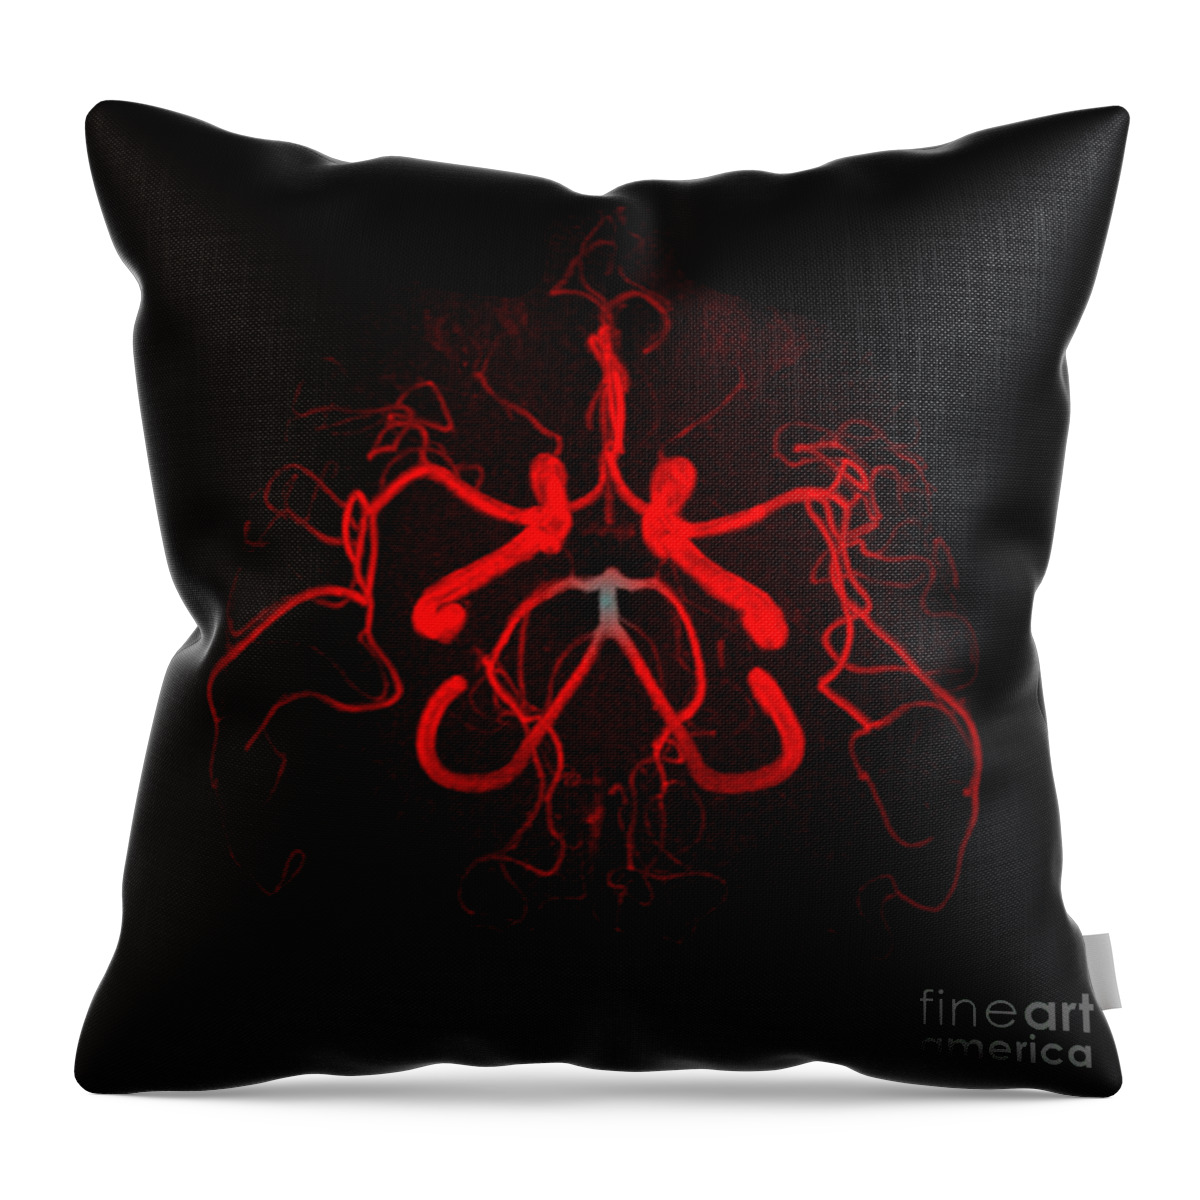 Intracranial Mra Throw Pillow featuring the photograph Normal Intracranial Mra #4 by Living Art Enterprises